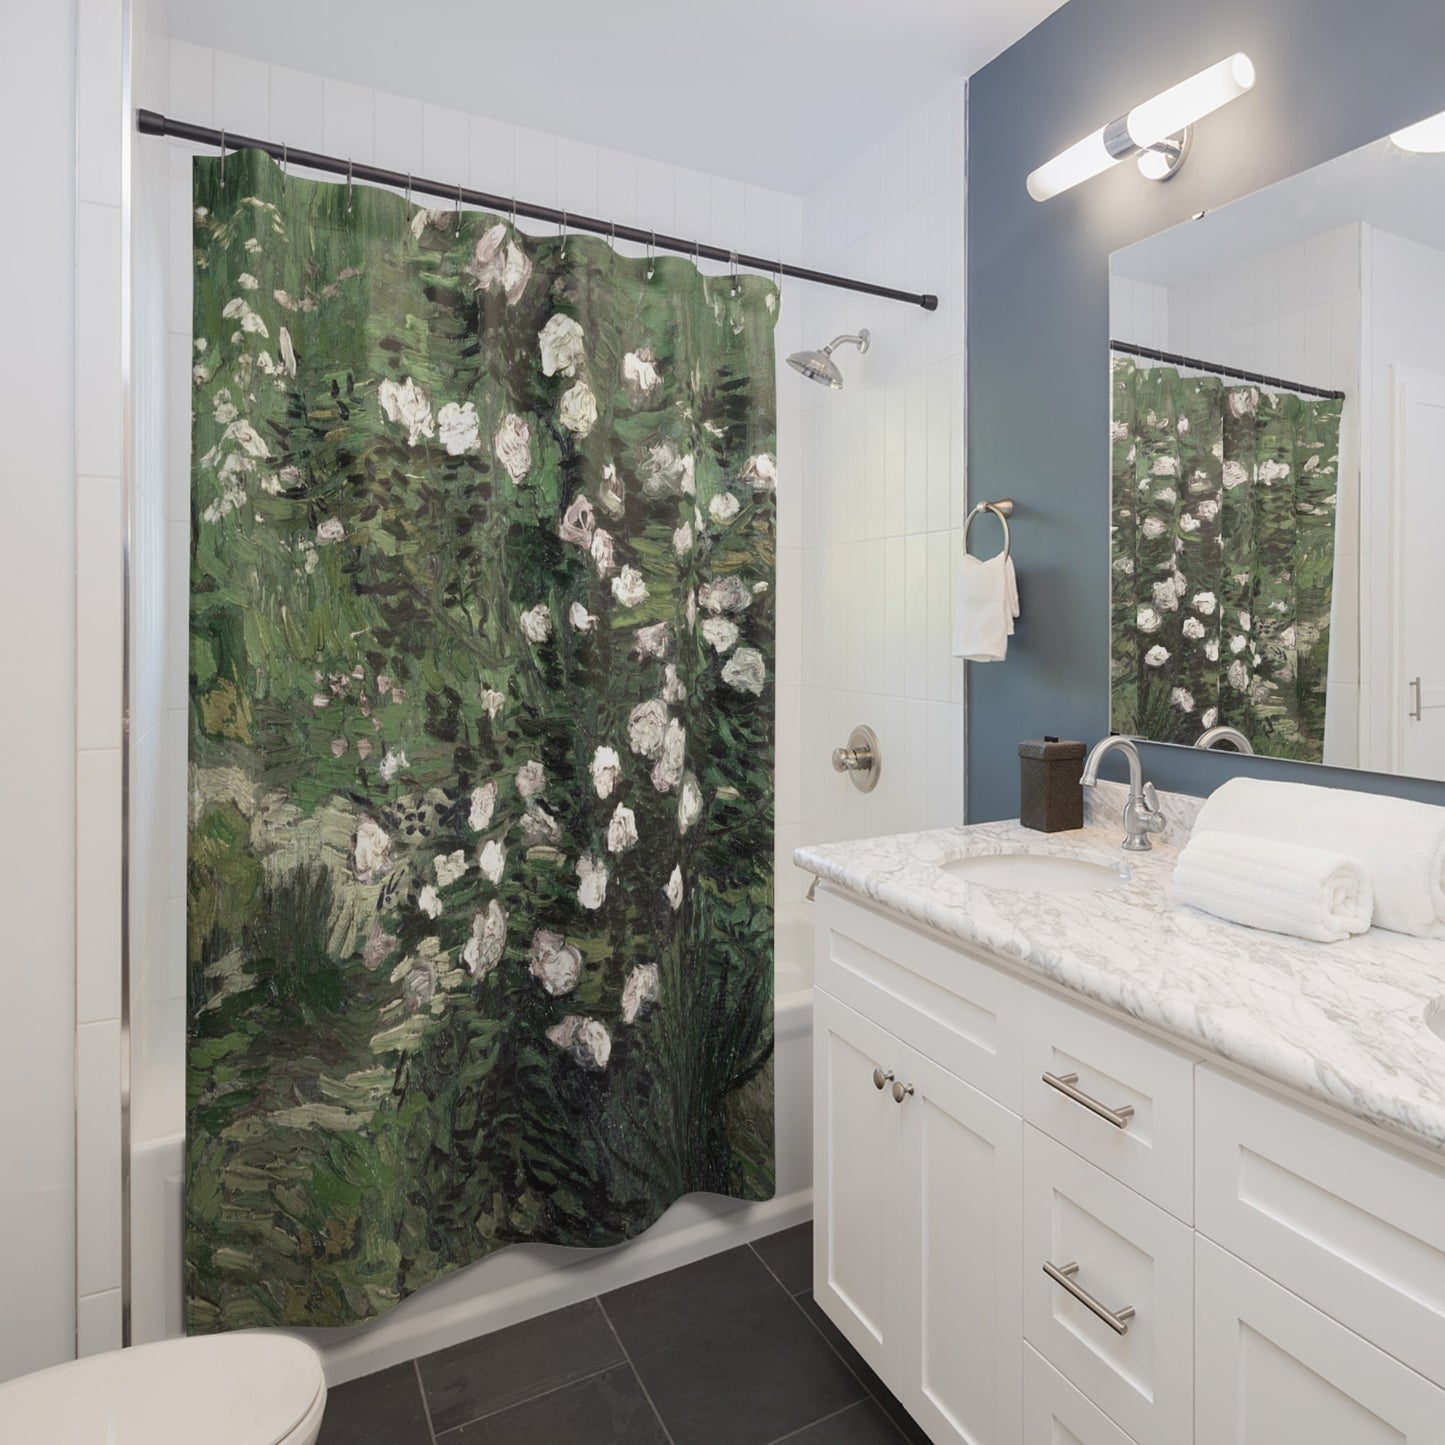 Green with White Flowers Shower Curtain Best Bathroom Decorating Ideas for Flowers Decor